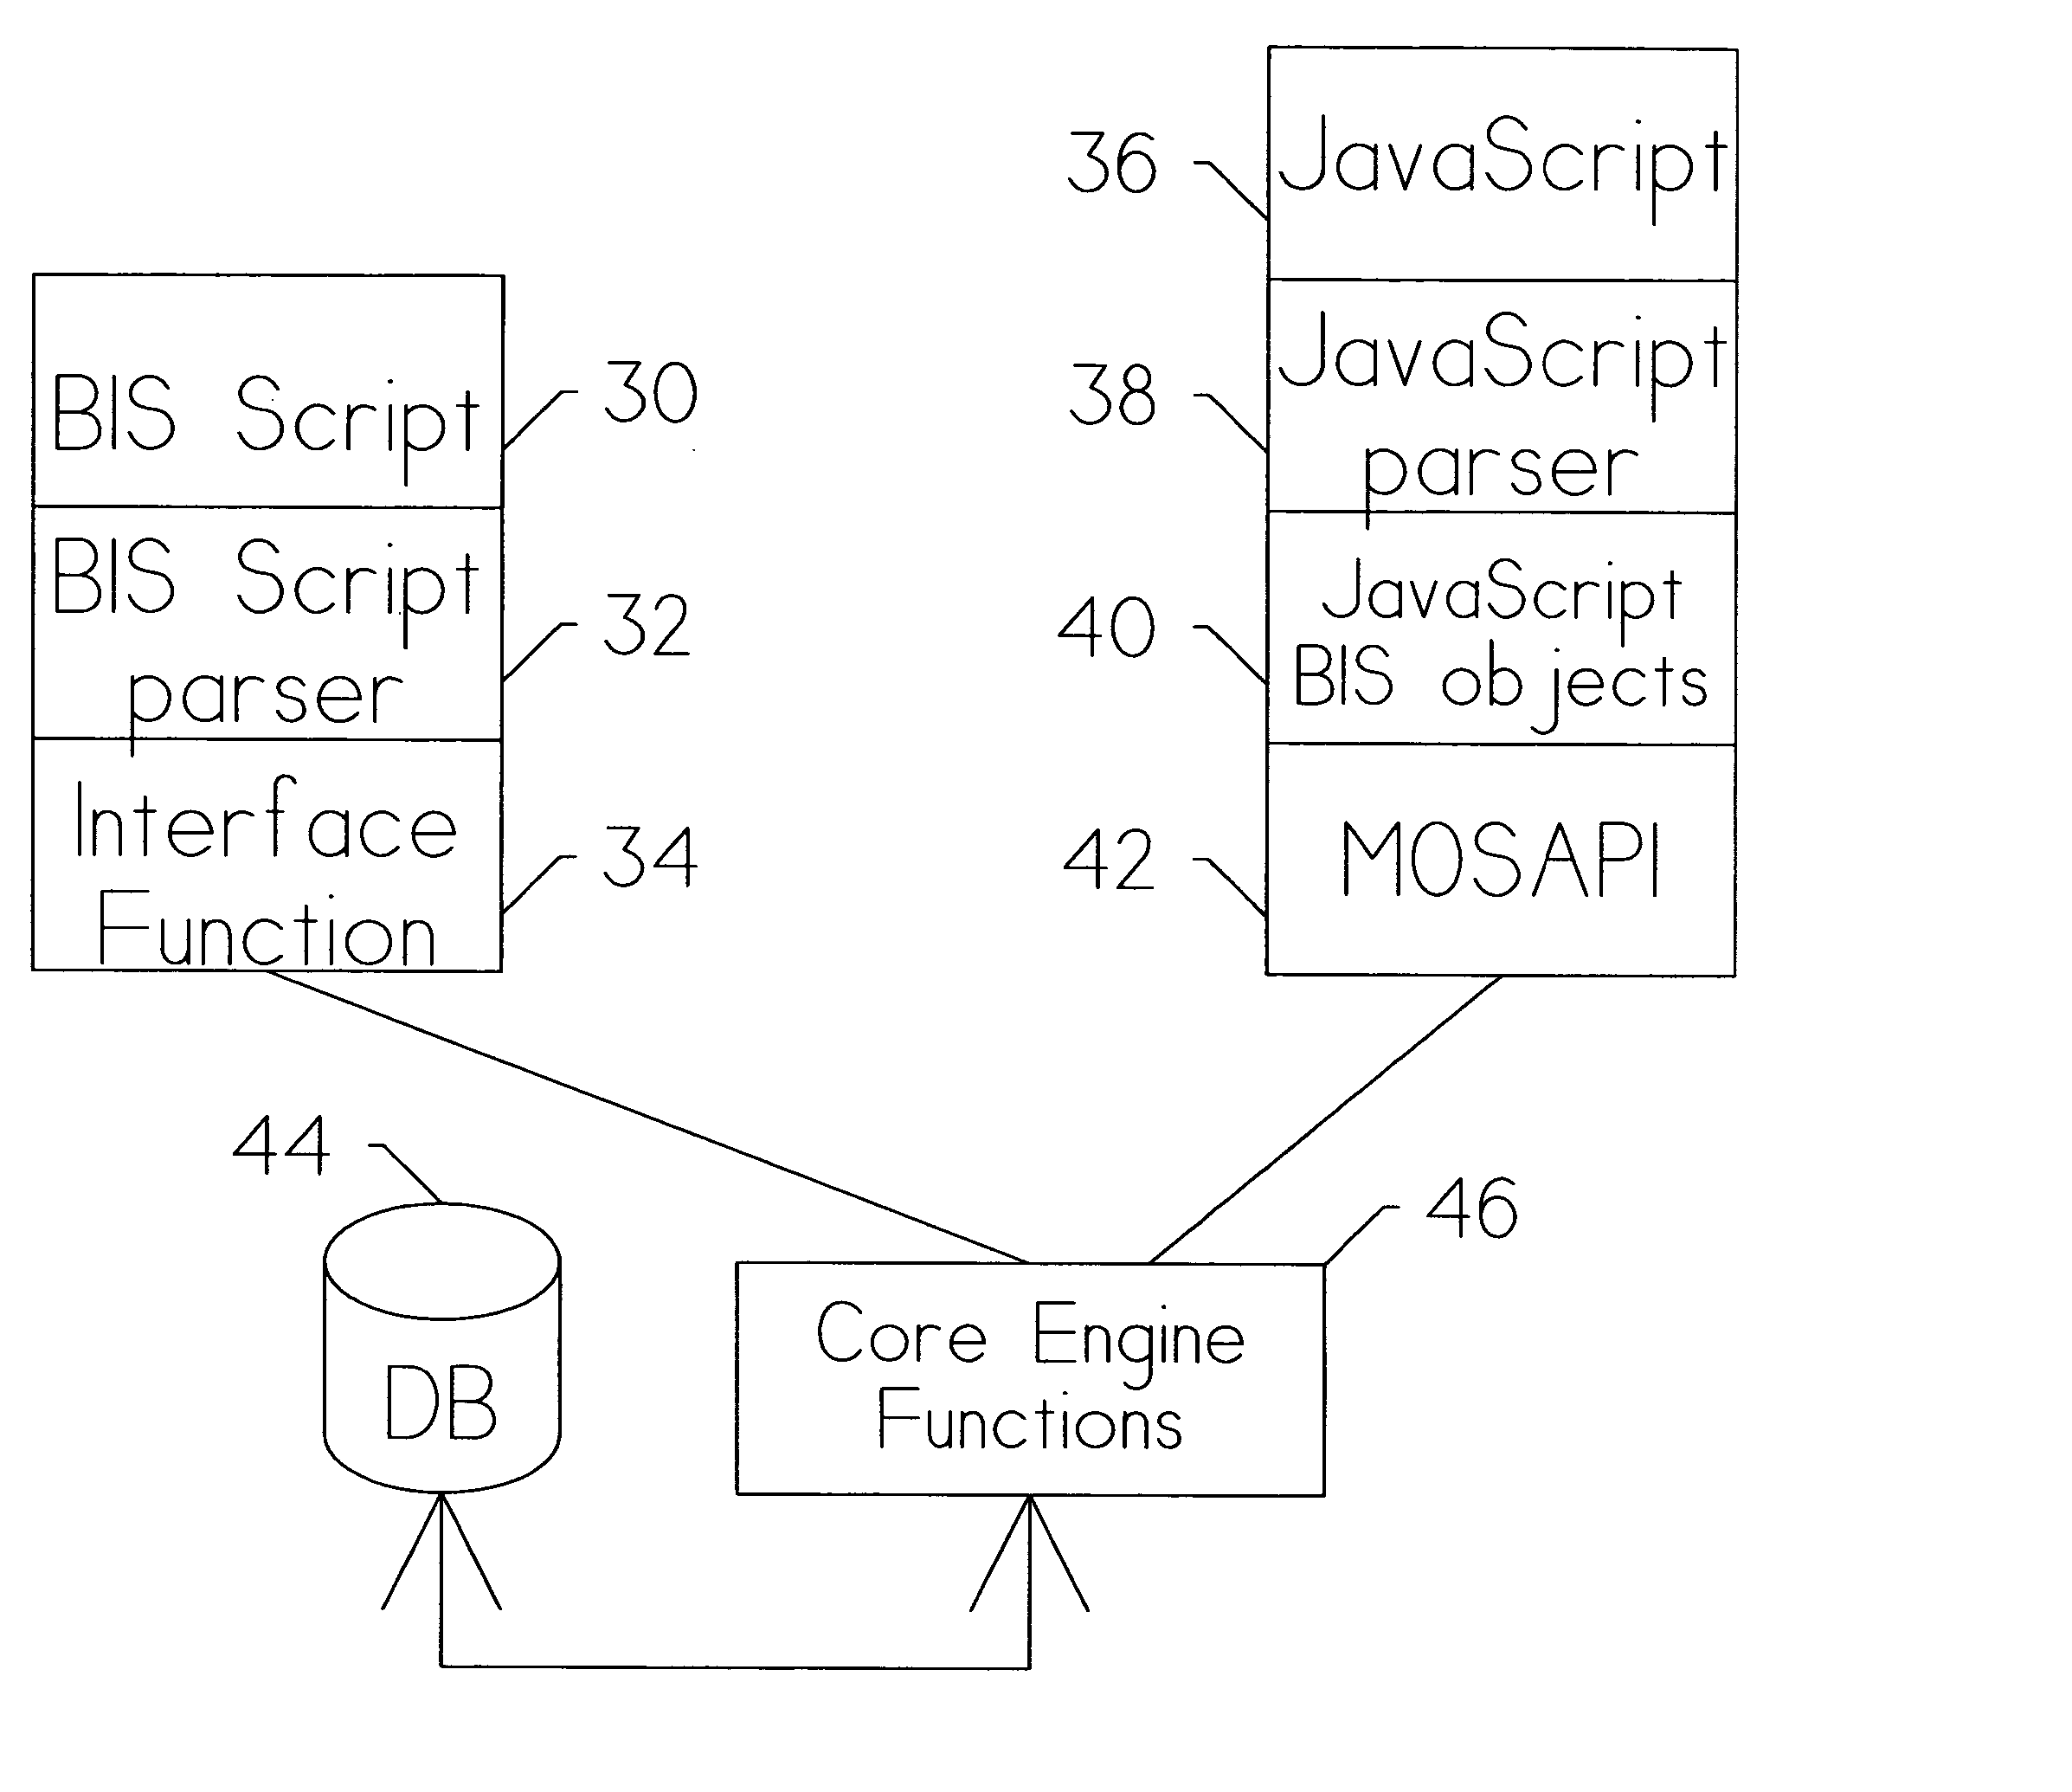 Method and apparatus for aggregated update of dataset records in a JavaScript environment